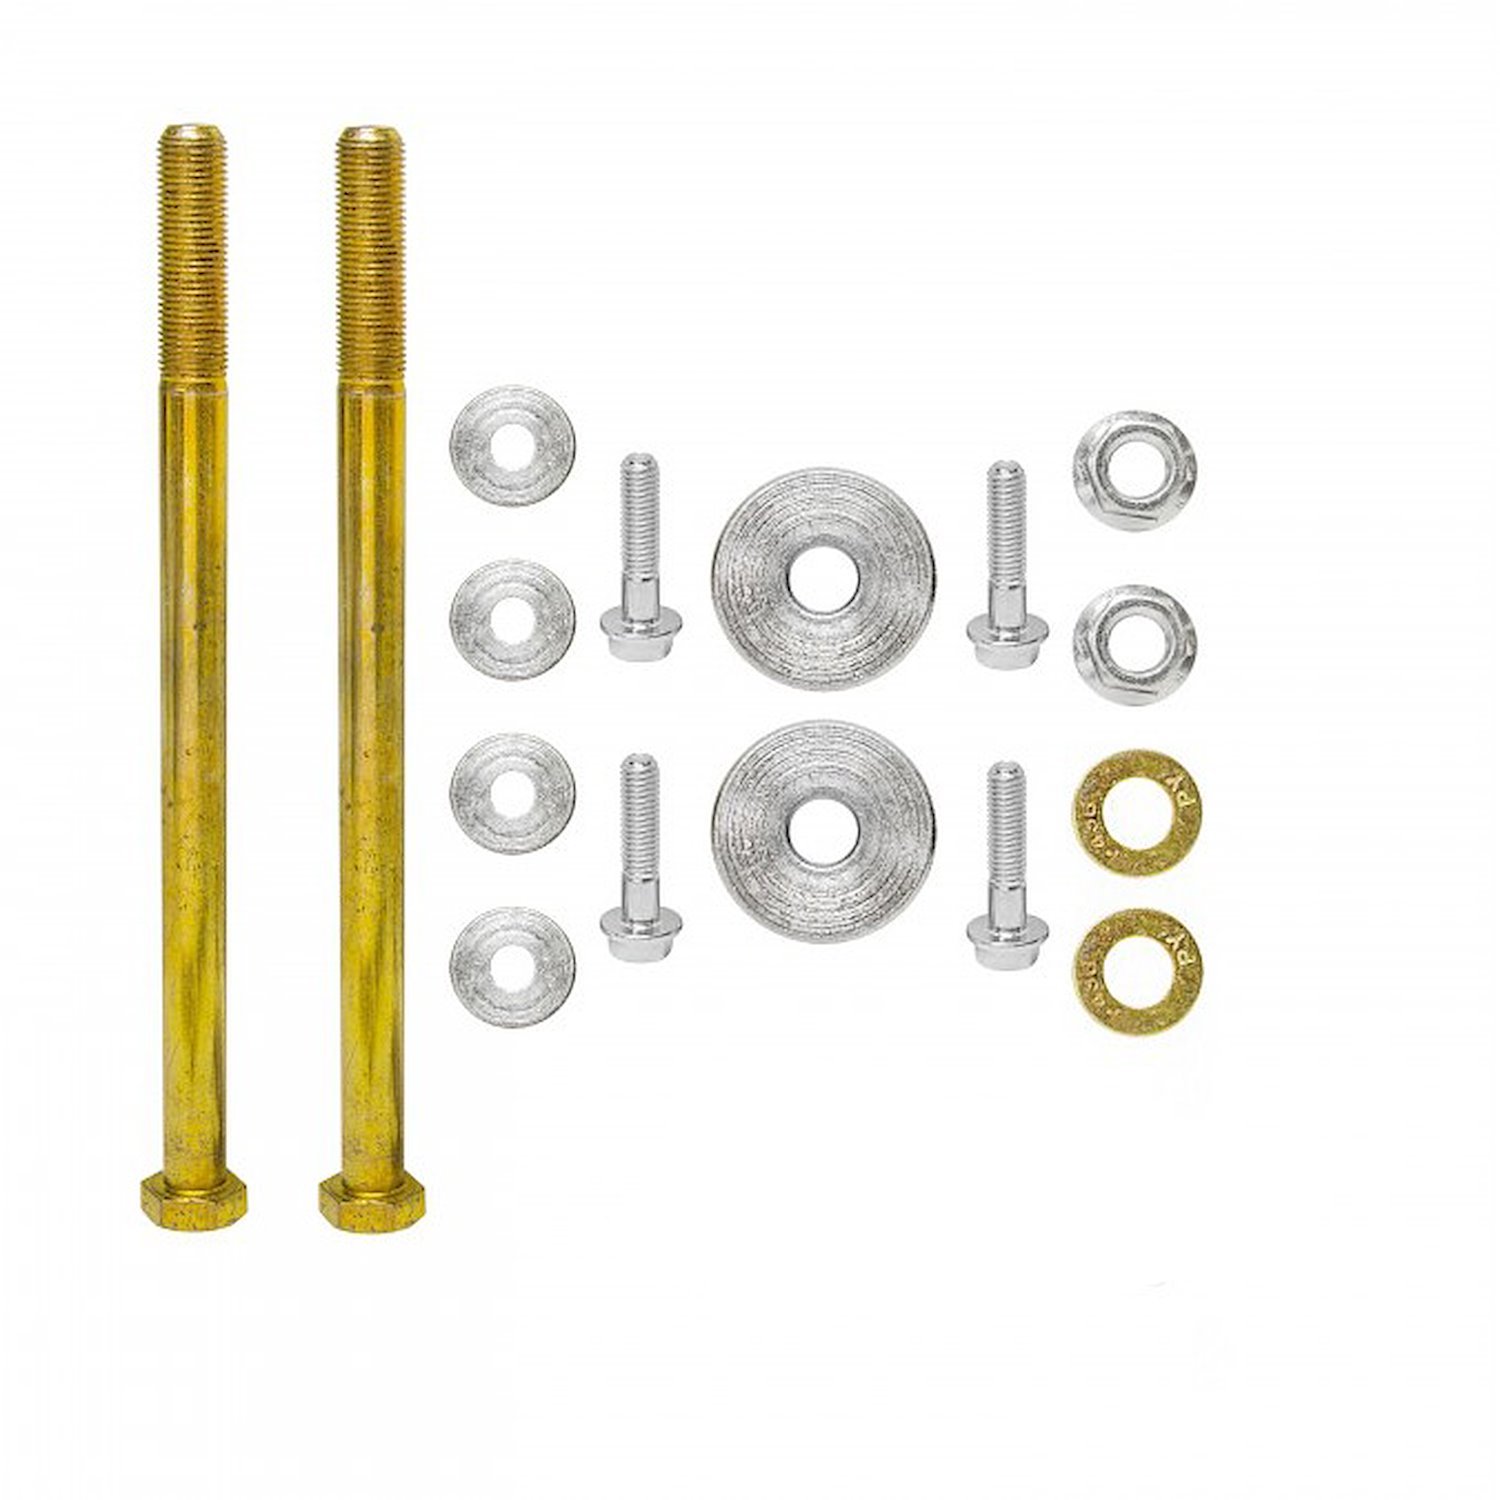 Differential Drop Kit for 1995-2004 Toyota Tacoma/1996-2002 Toyota 4Runner/1996-2006 Toyota Tundra